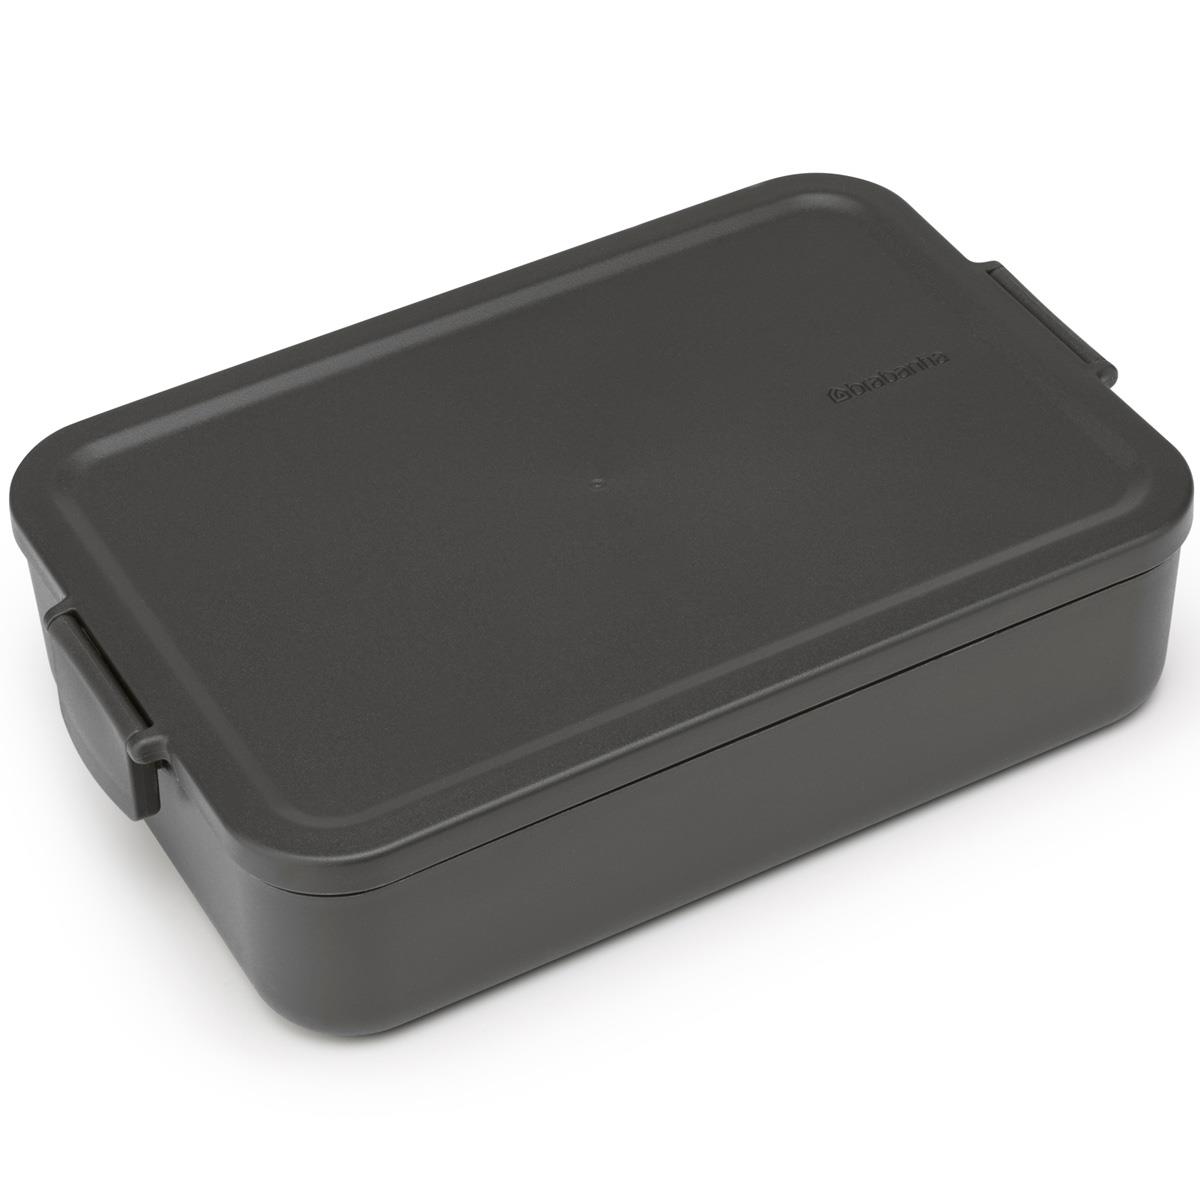 What are the dimensions of the Brabantia Make & Take Bento Lunchbox?